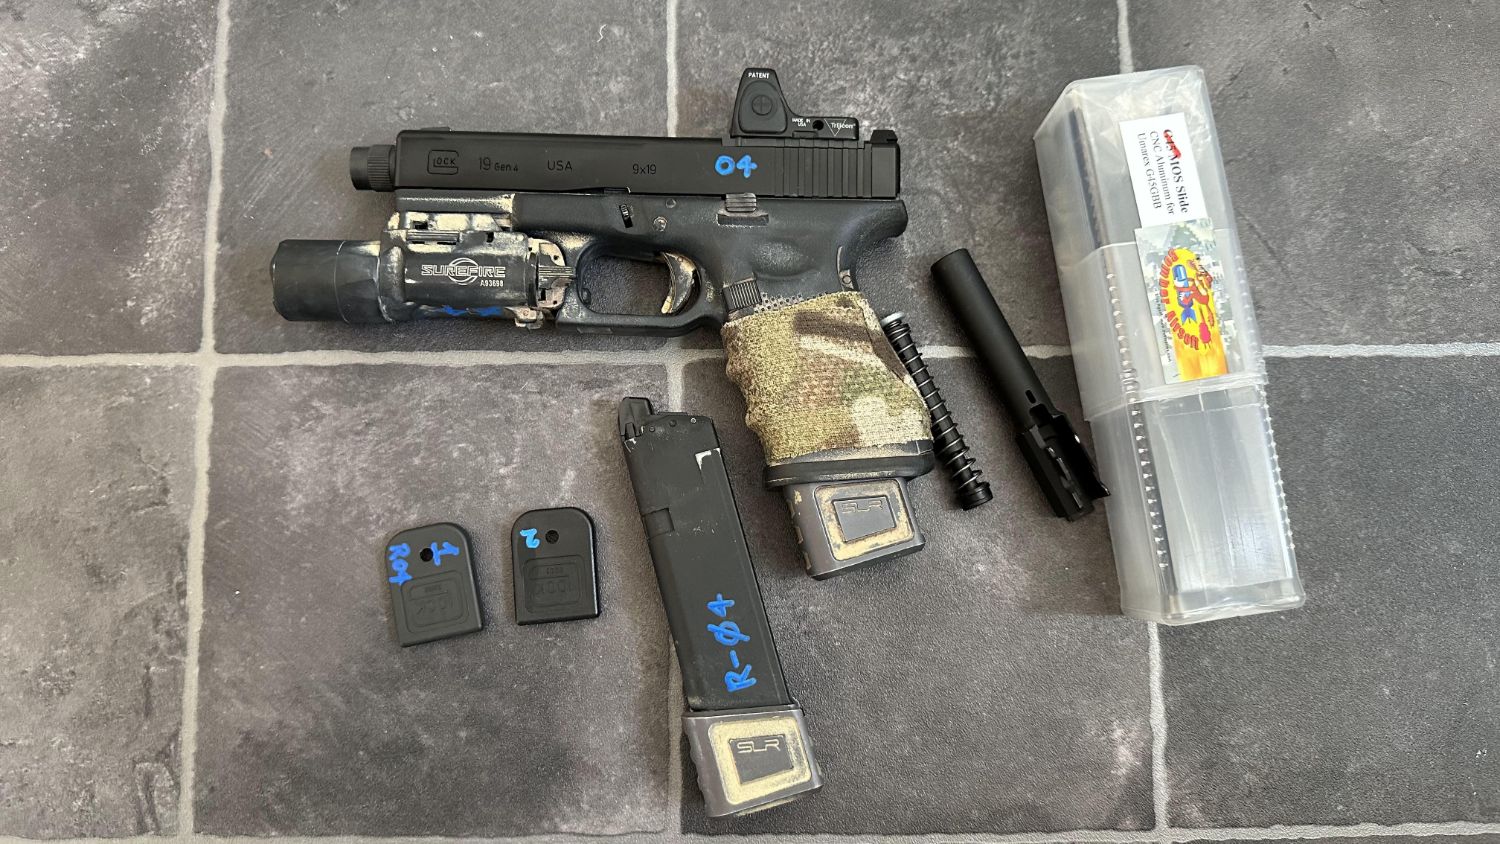 Umarex Glock 19 Gen 4 with Bomber MOS slide kit and threaded